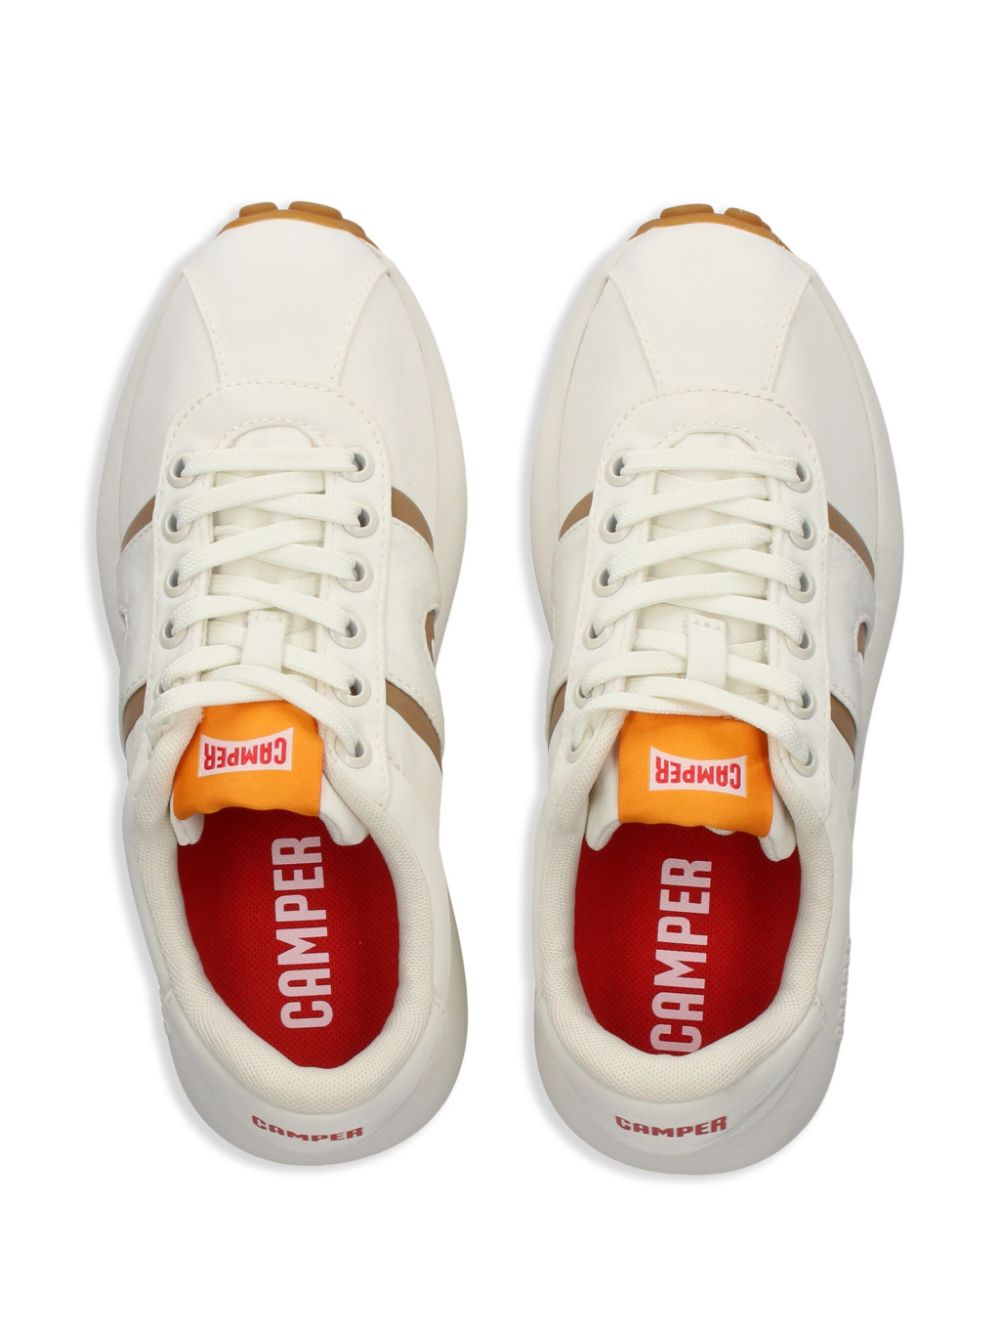 Shop Camper Pelotas Athens Panelled Sneakers In White